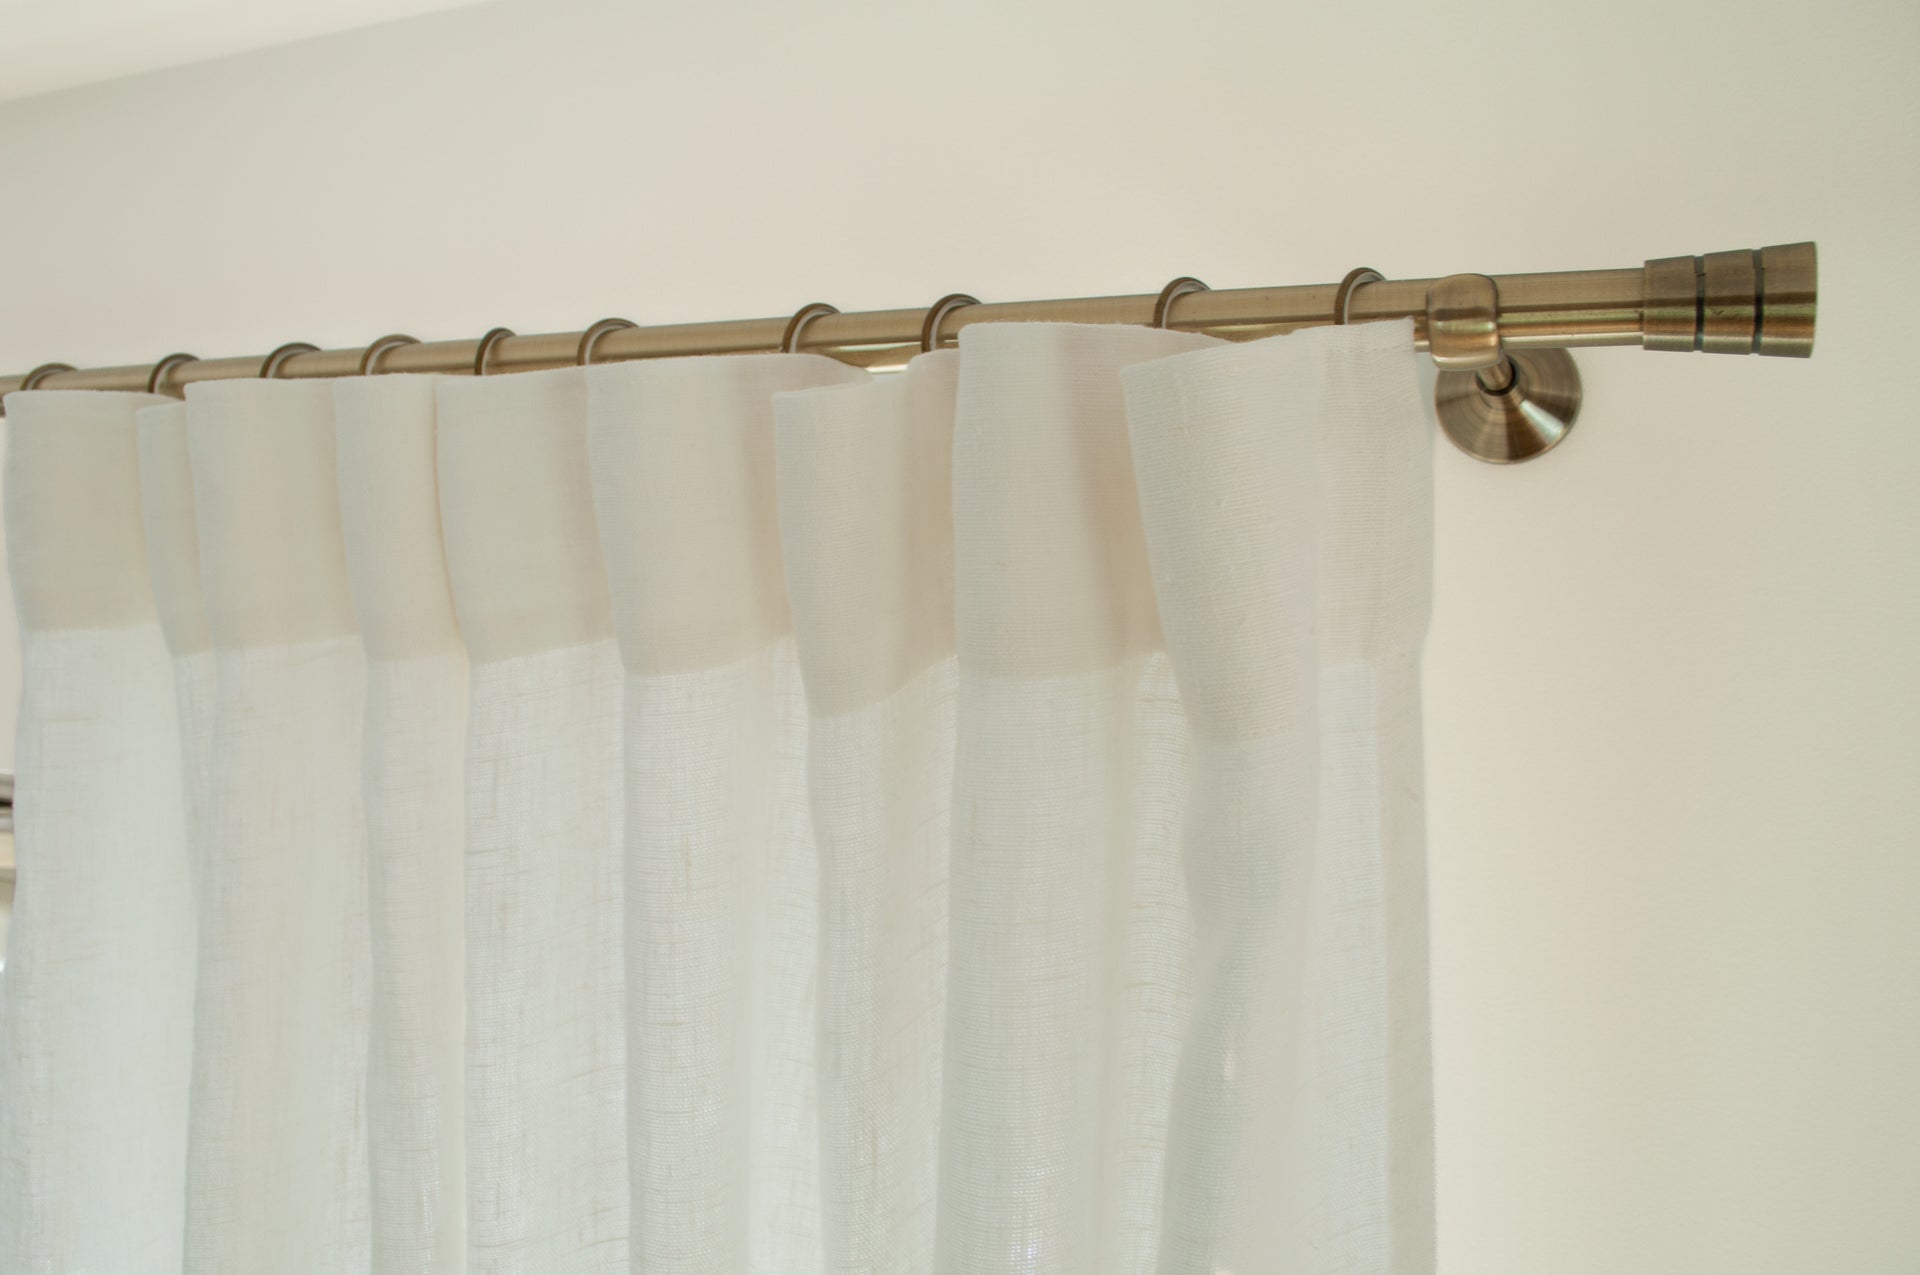 Multiway curtain hung on hooks and rings